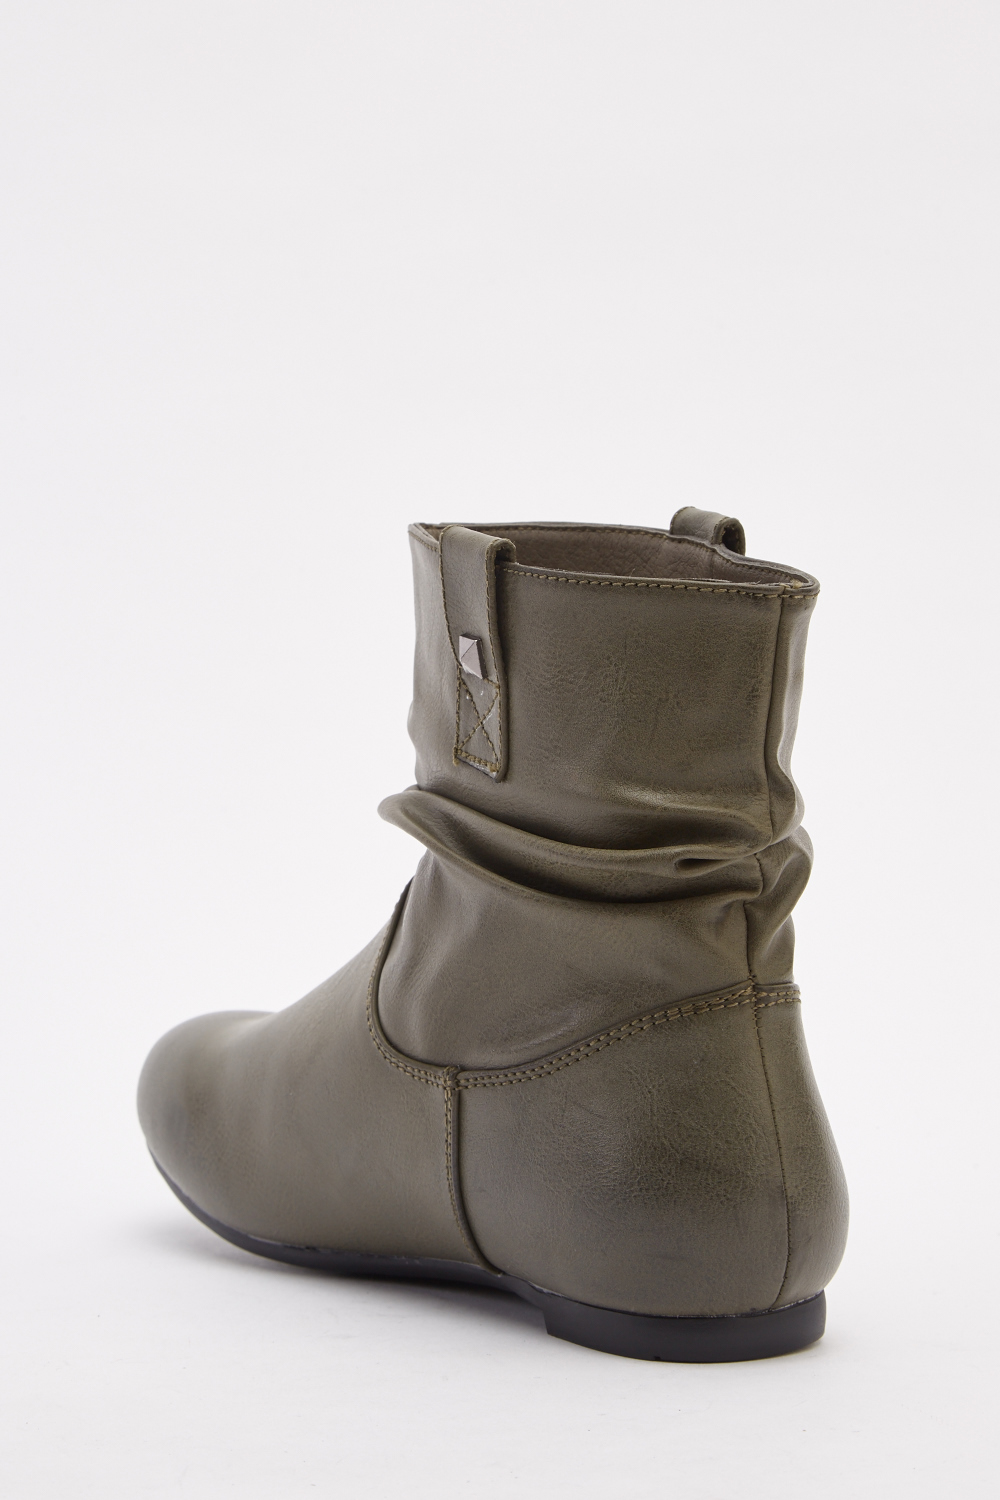 slouch pixie ankle boots